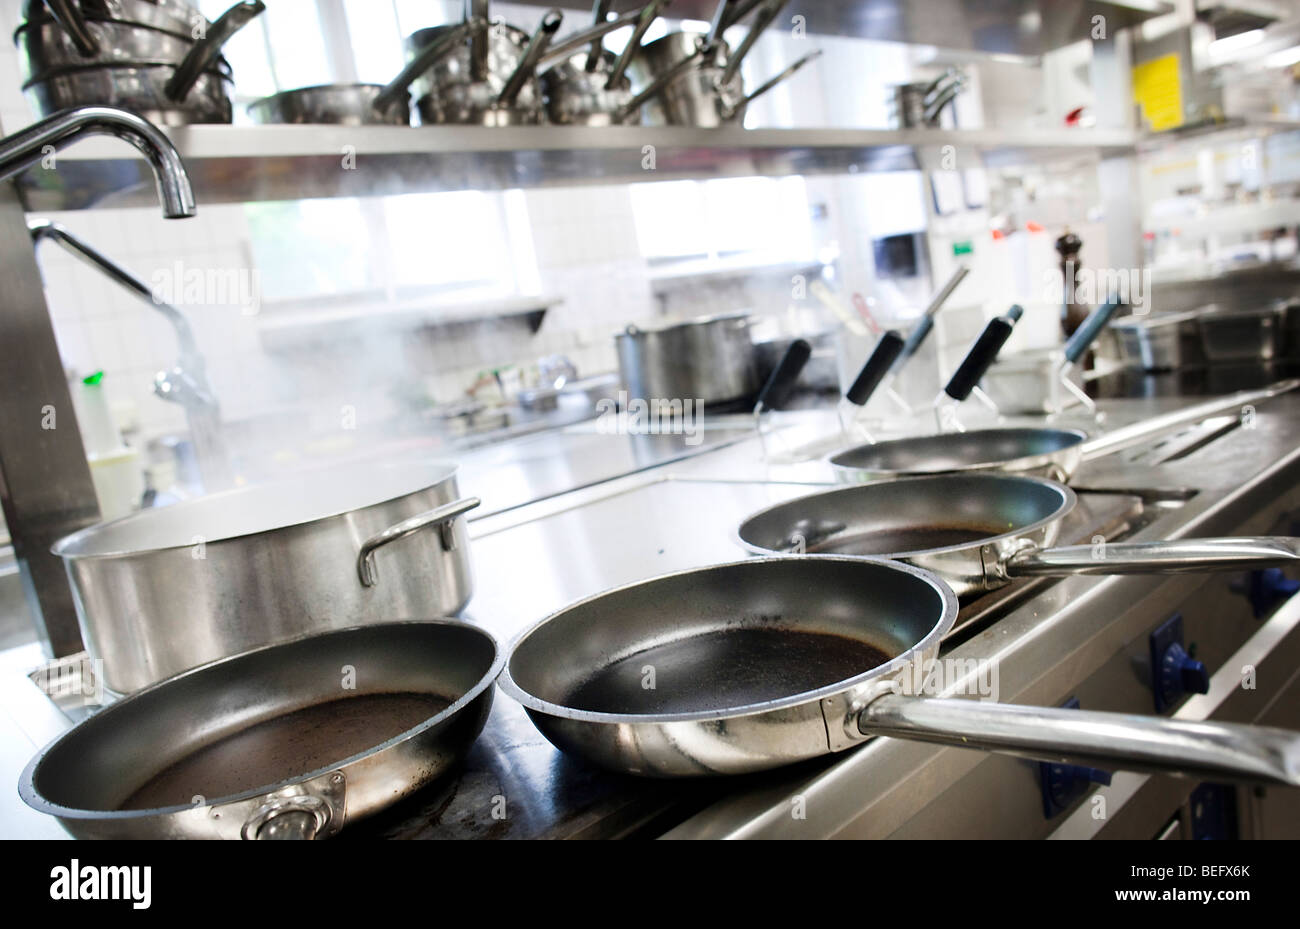 Skillets in a kitchen Stock Photo